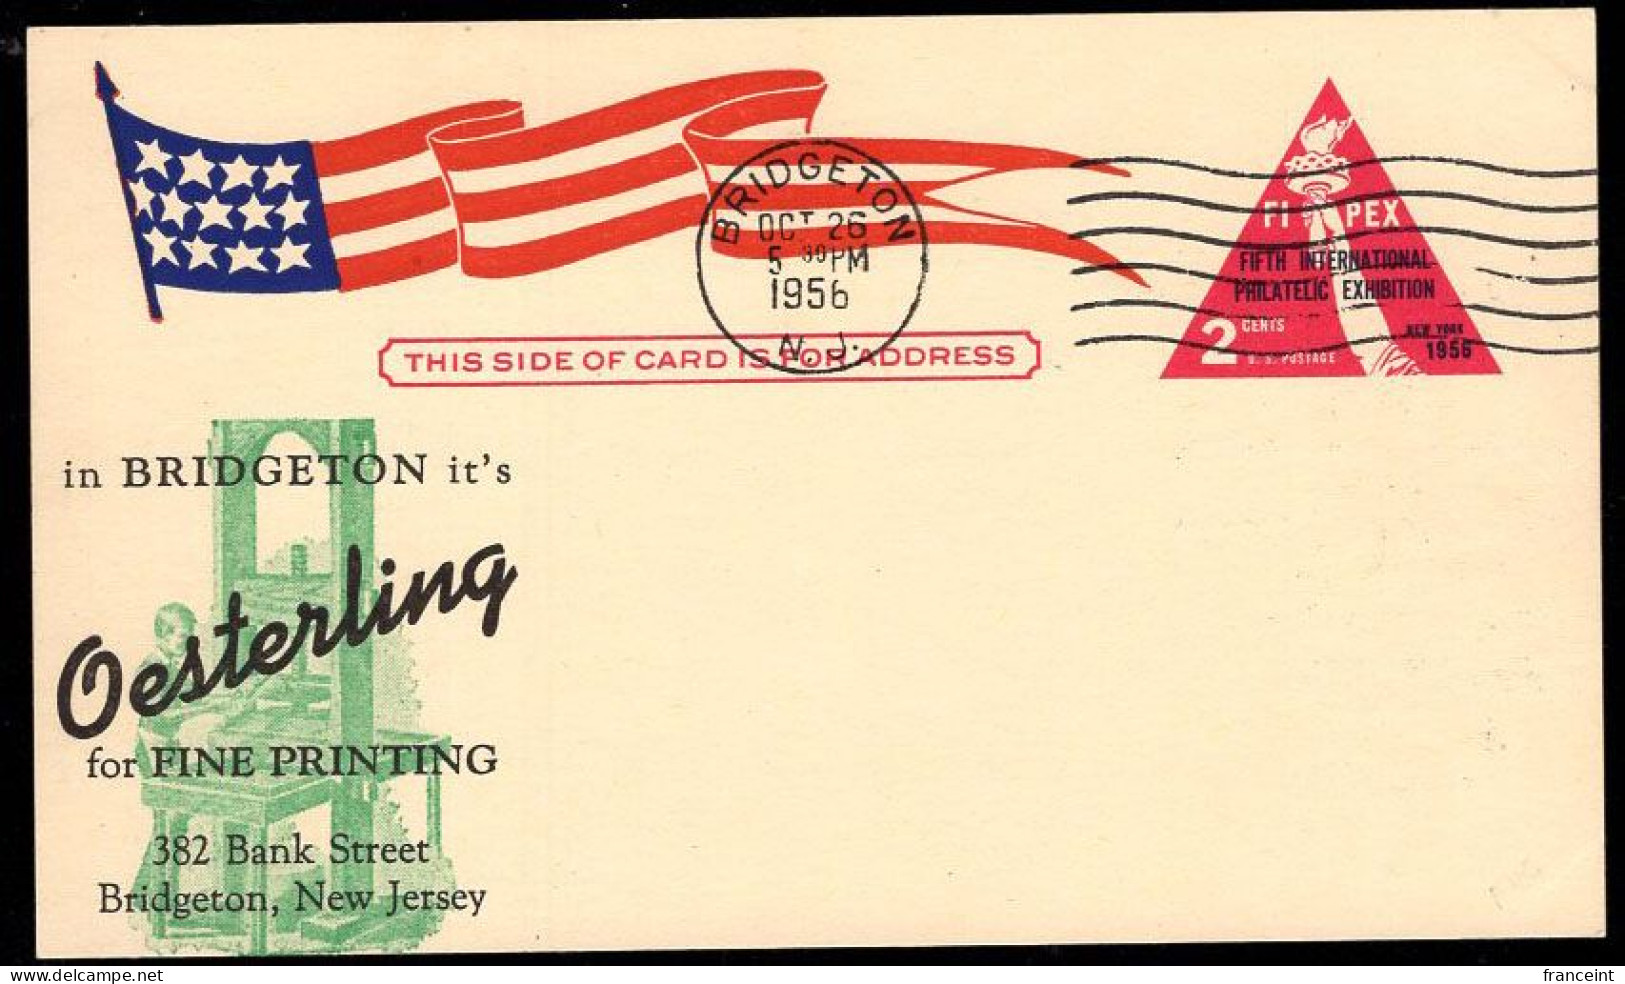 U.S.A.(1956) Printing Press. Two Cent Postal Card With Illustrated Ad For Oesterling Printing, Bridgeton, New Jersey. - 1941-60